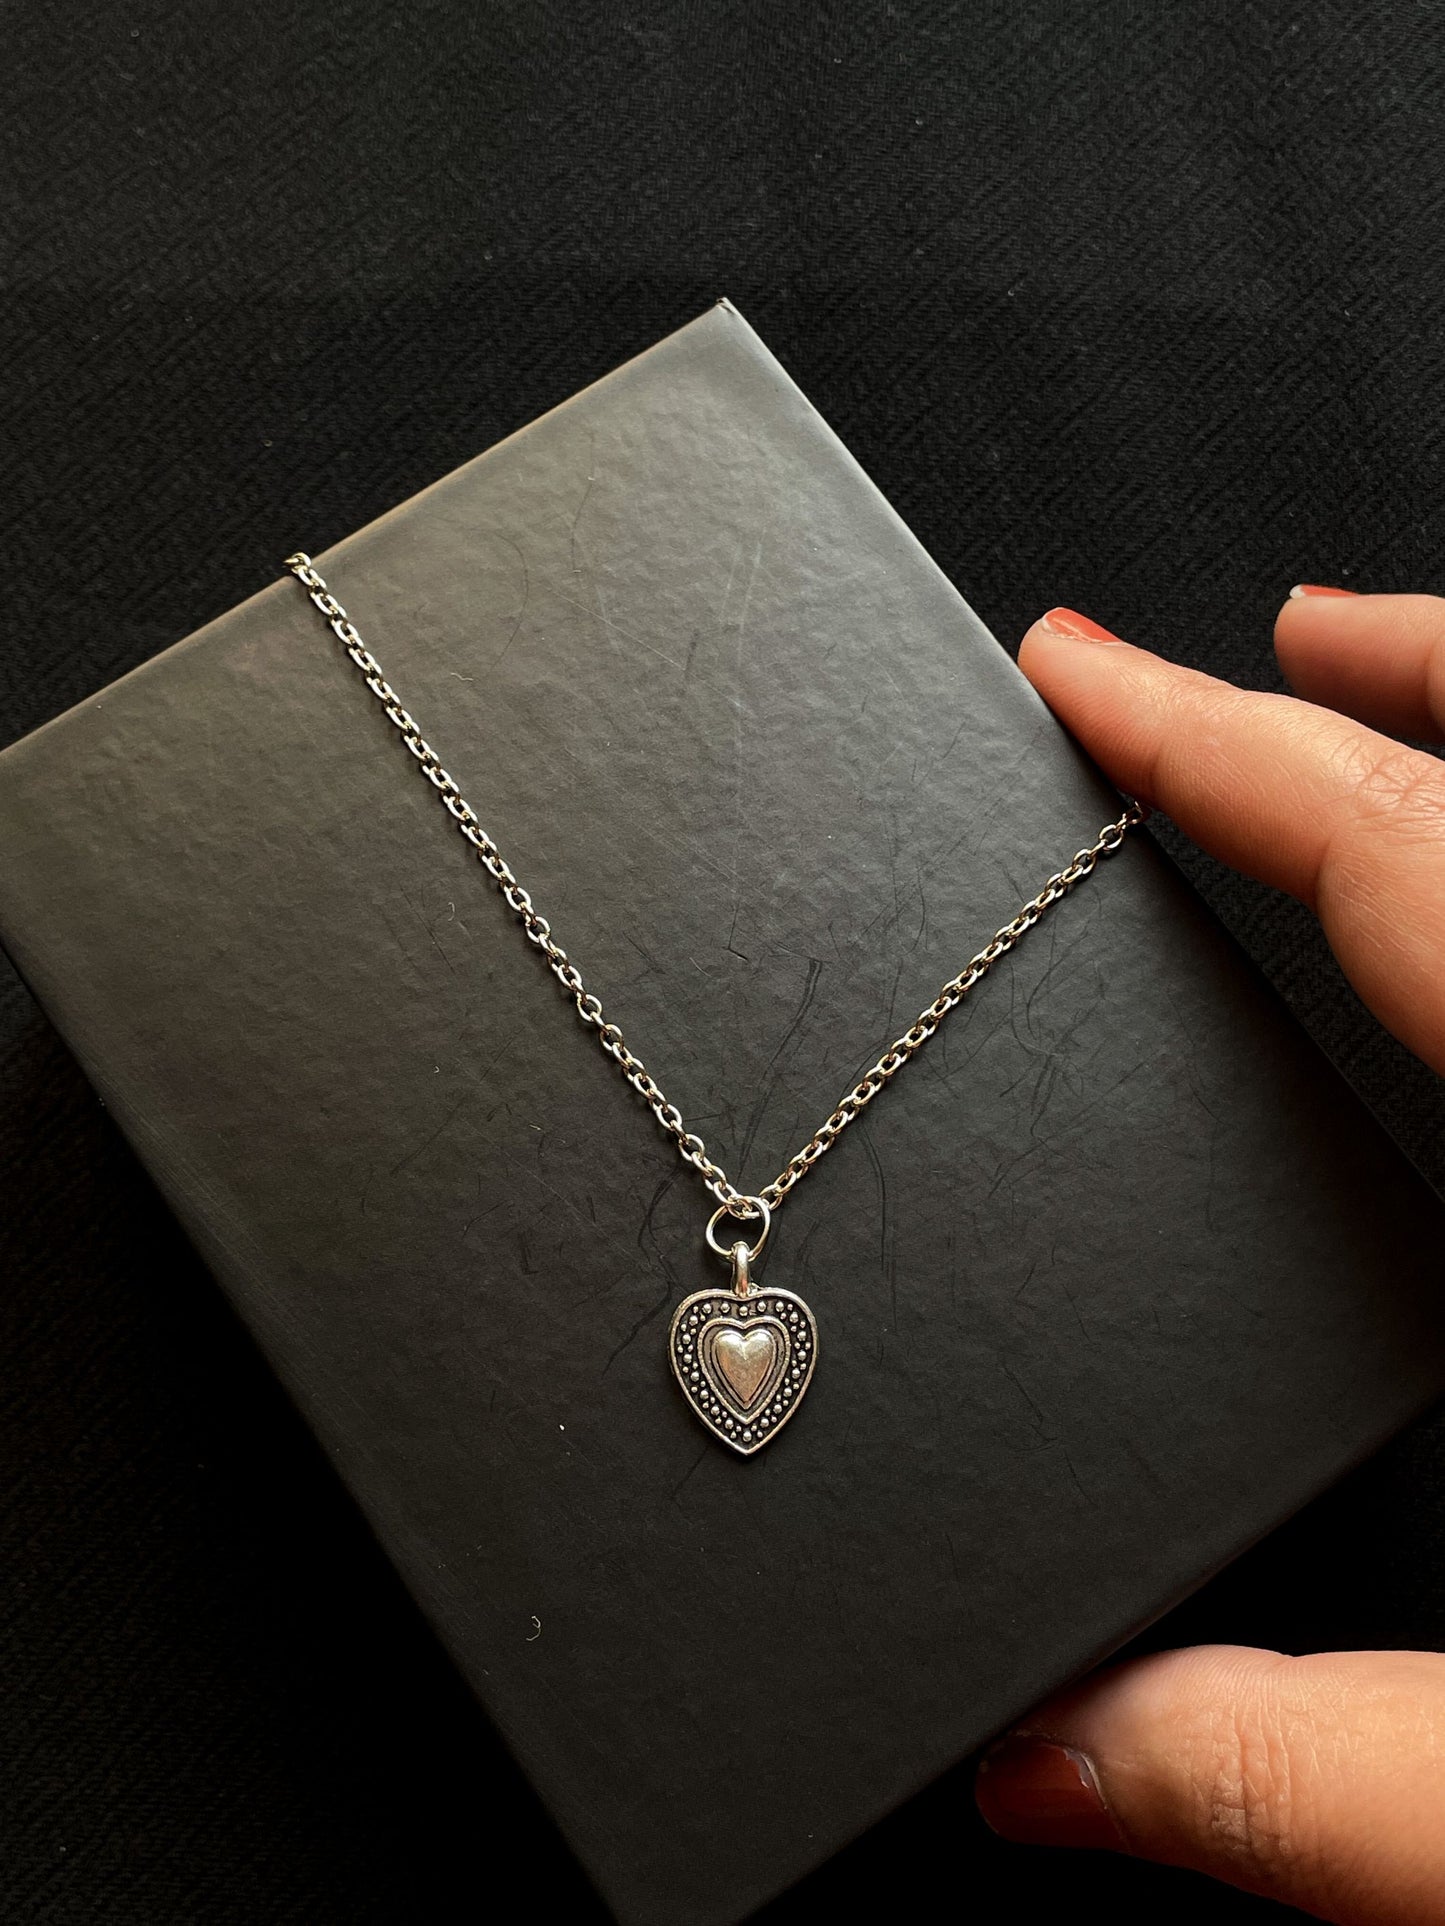 "In The Name Of Love" Silver Heart Pendant With Chain